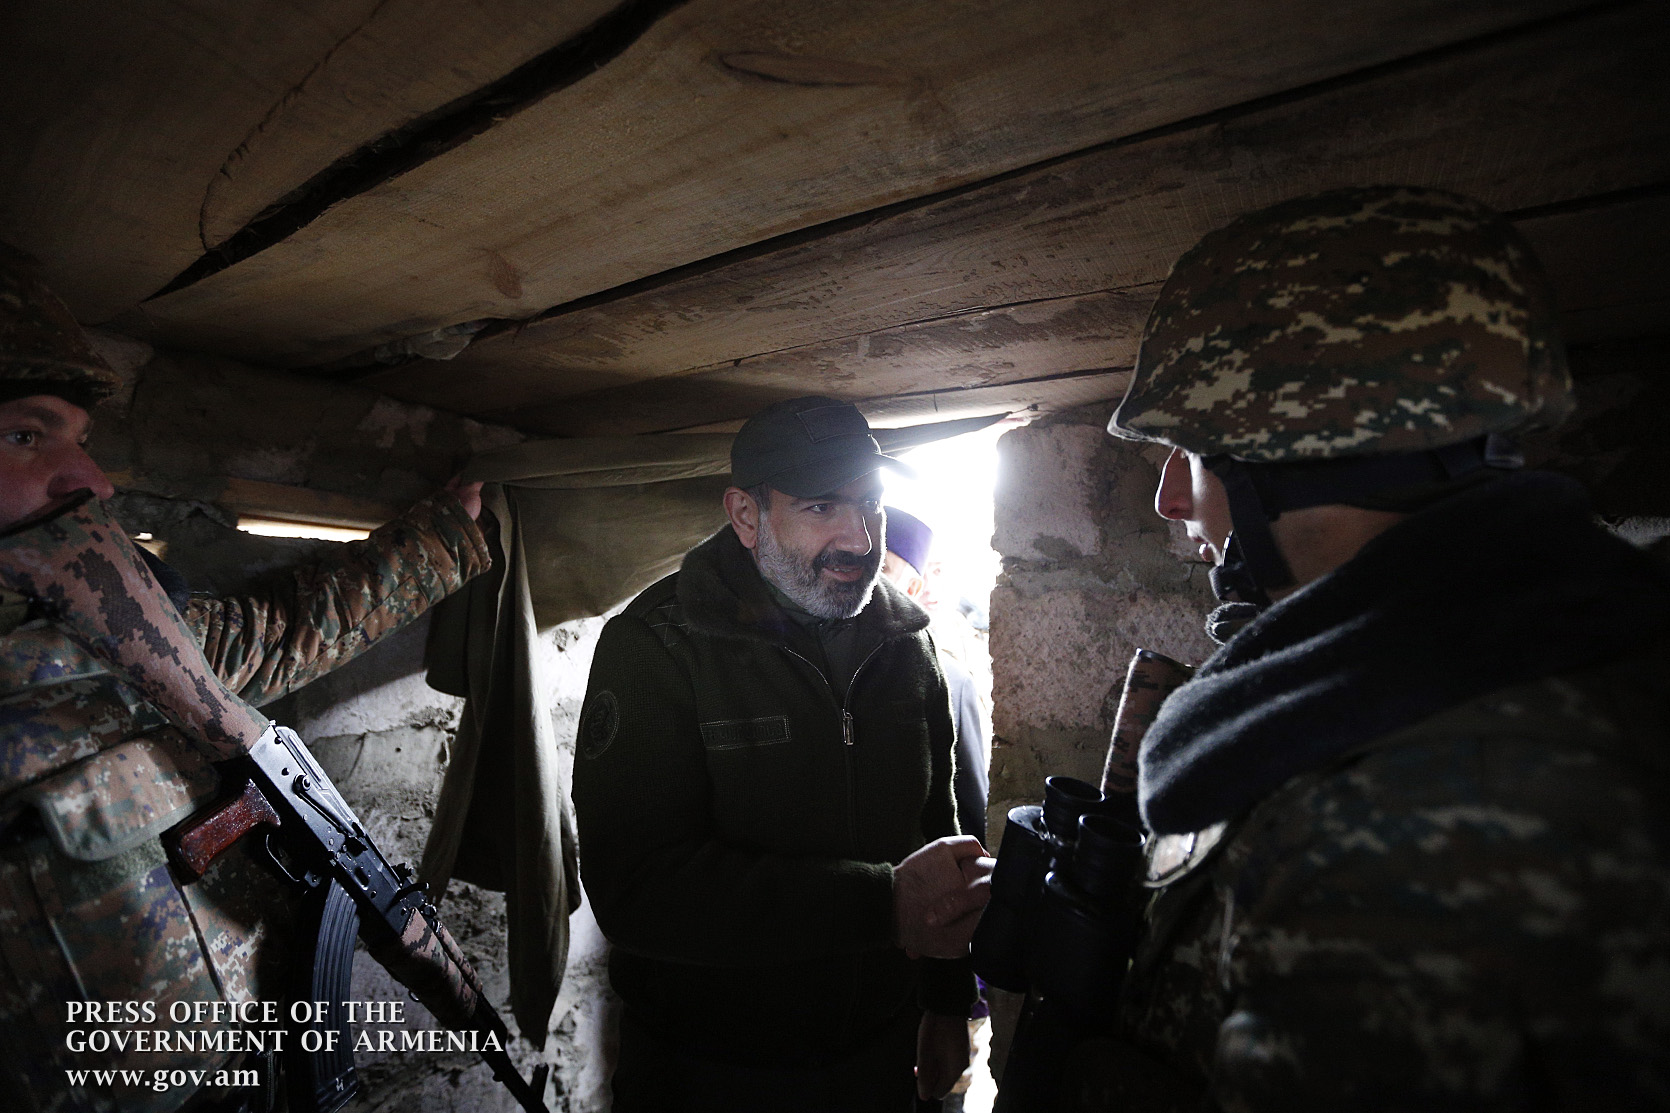 The Government has the task of preserving as much as possible the achievements of our servicemen and the Armed Forces – Nikol Pashinyan visits military stronghold and congratulates servicemen on New Year